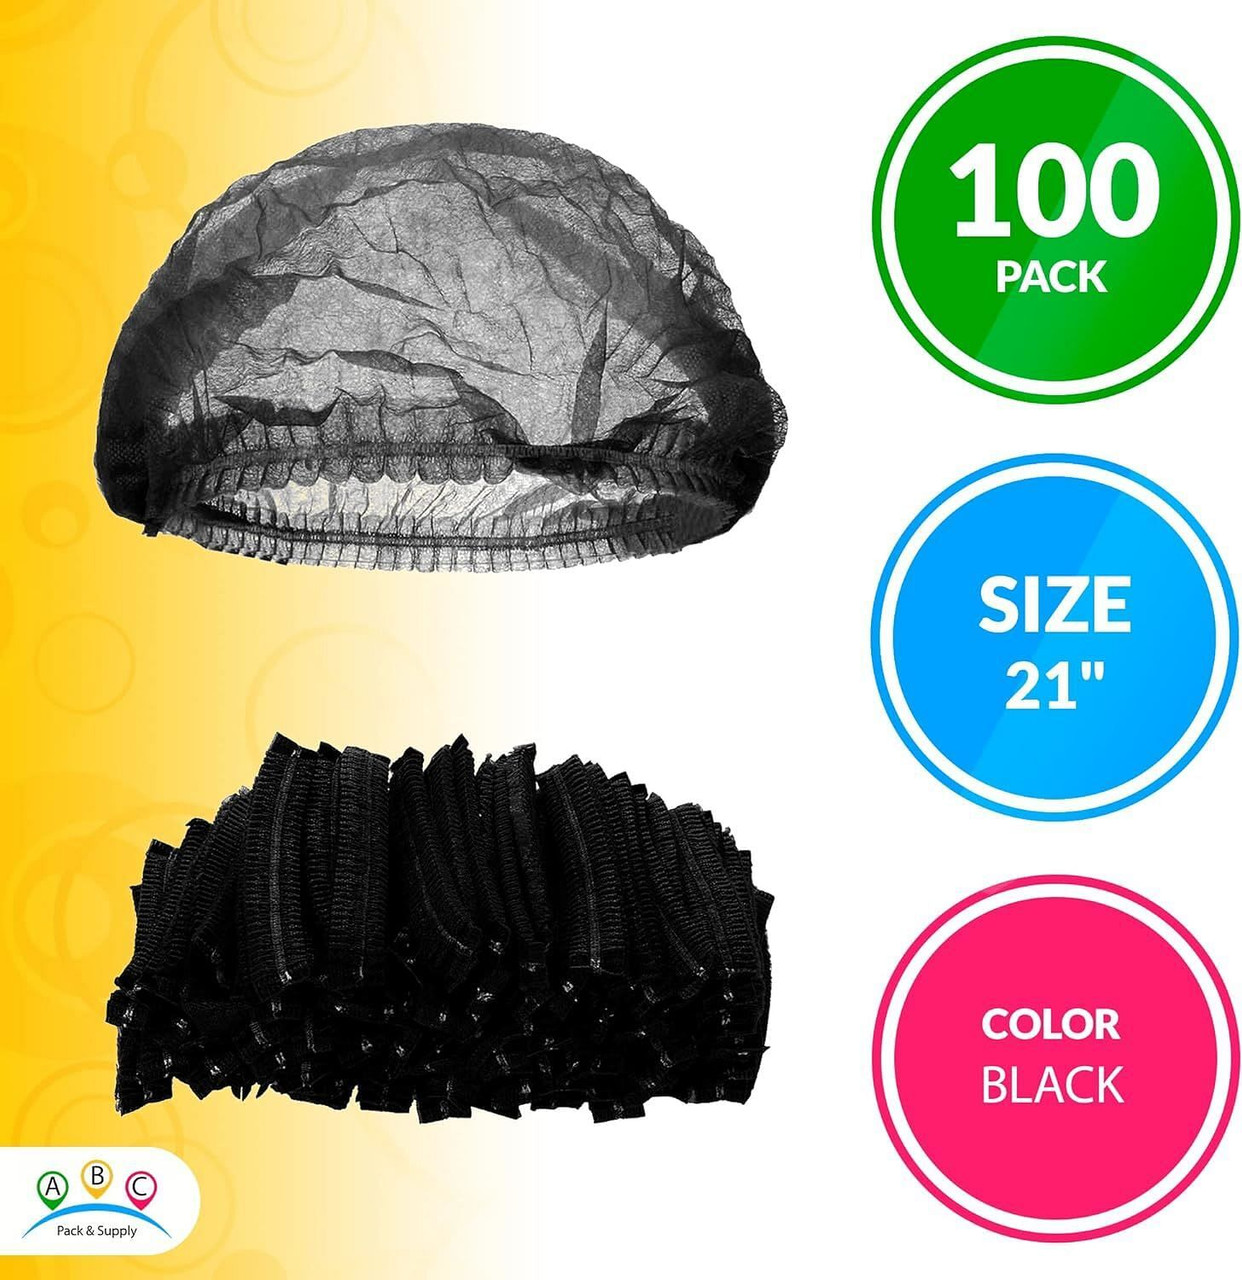 Pack of 100 Black Mob Caps 21' Hair Caps with Elastic Stretch Band Disposable Polypropylene Hair Co